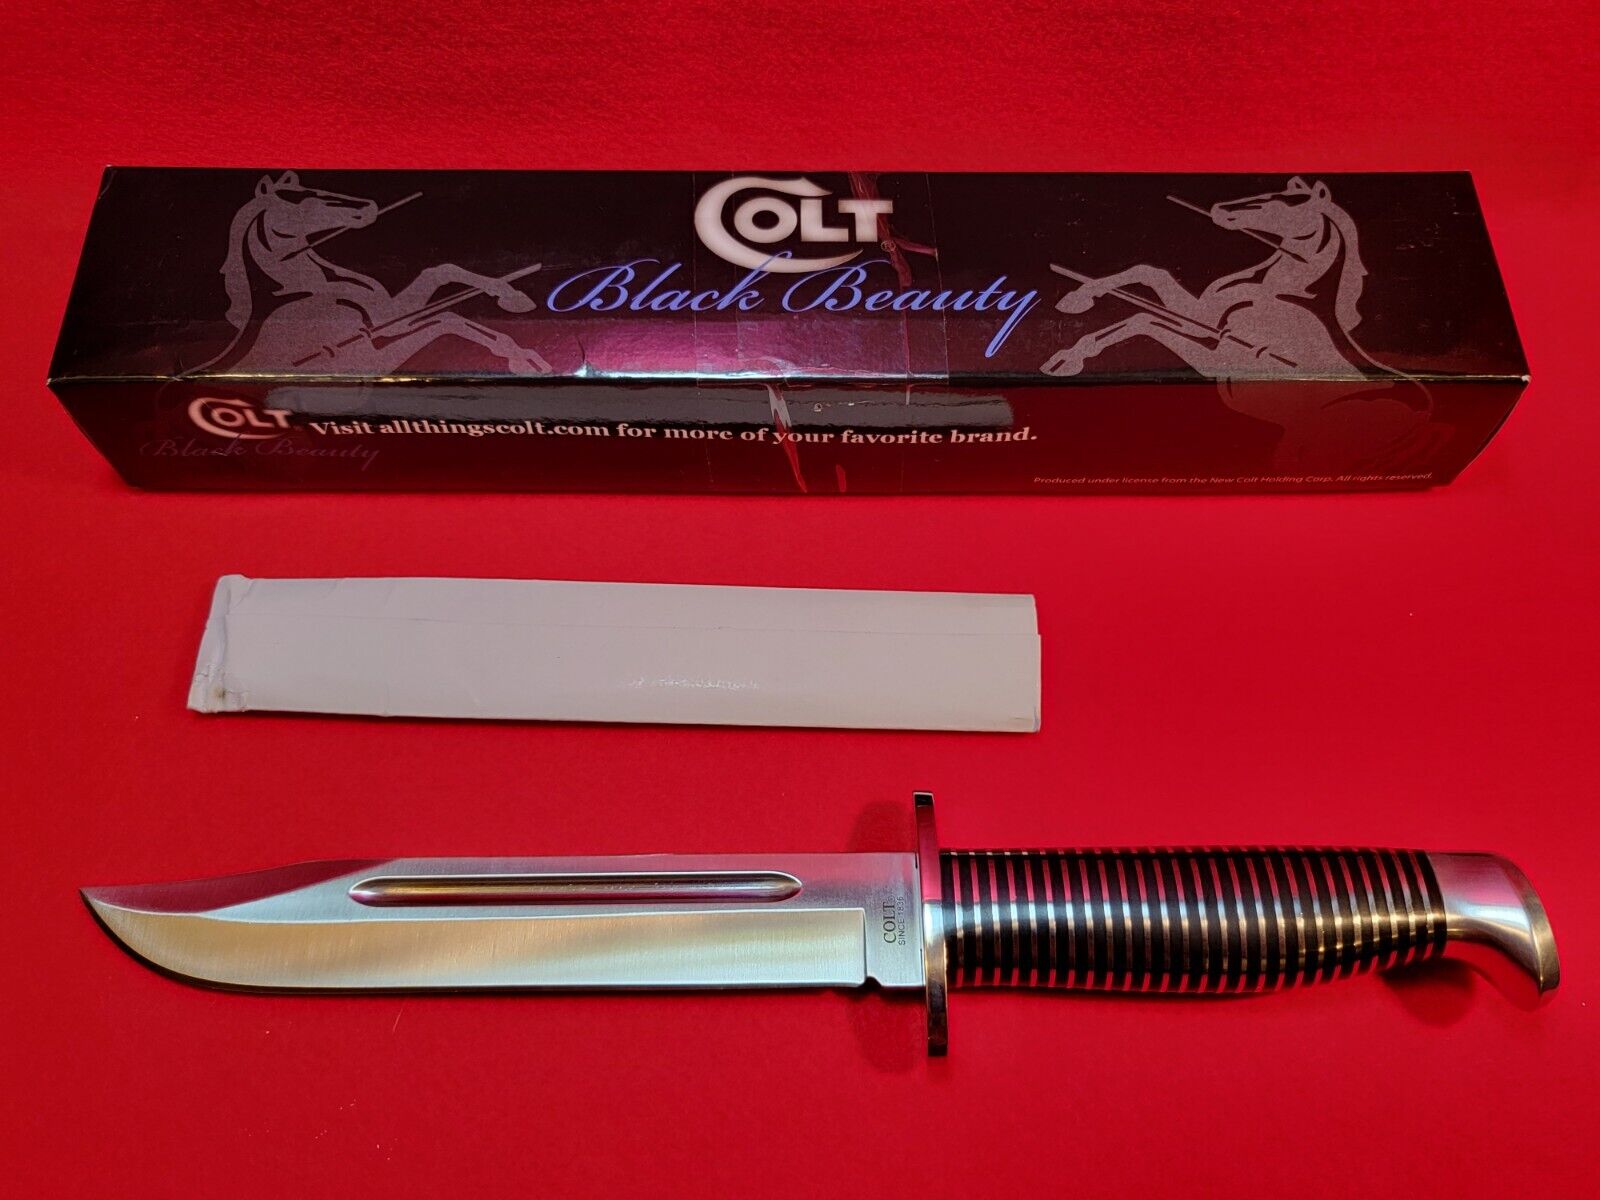 Colt CT491 Black Beauty Skinner Knife, New in Box, One of Four for Sale